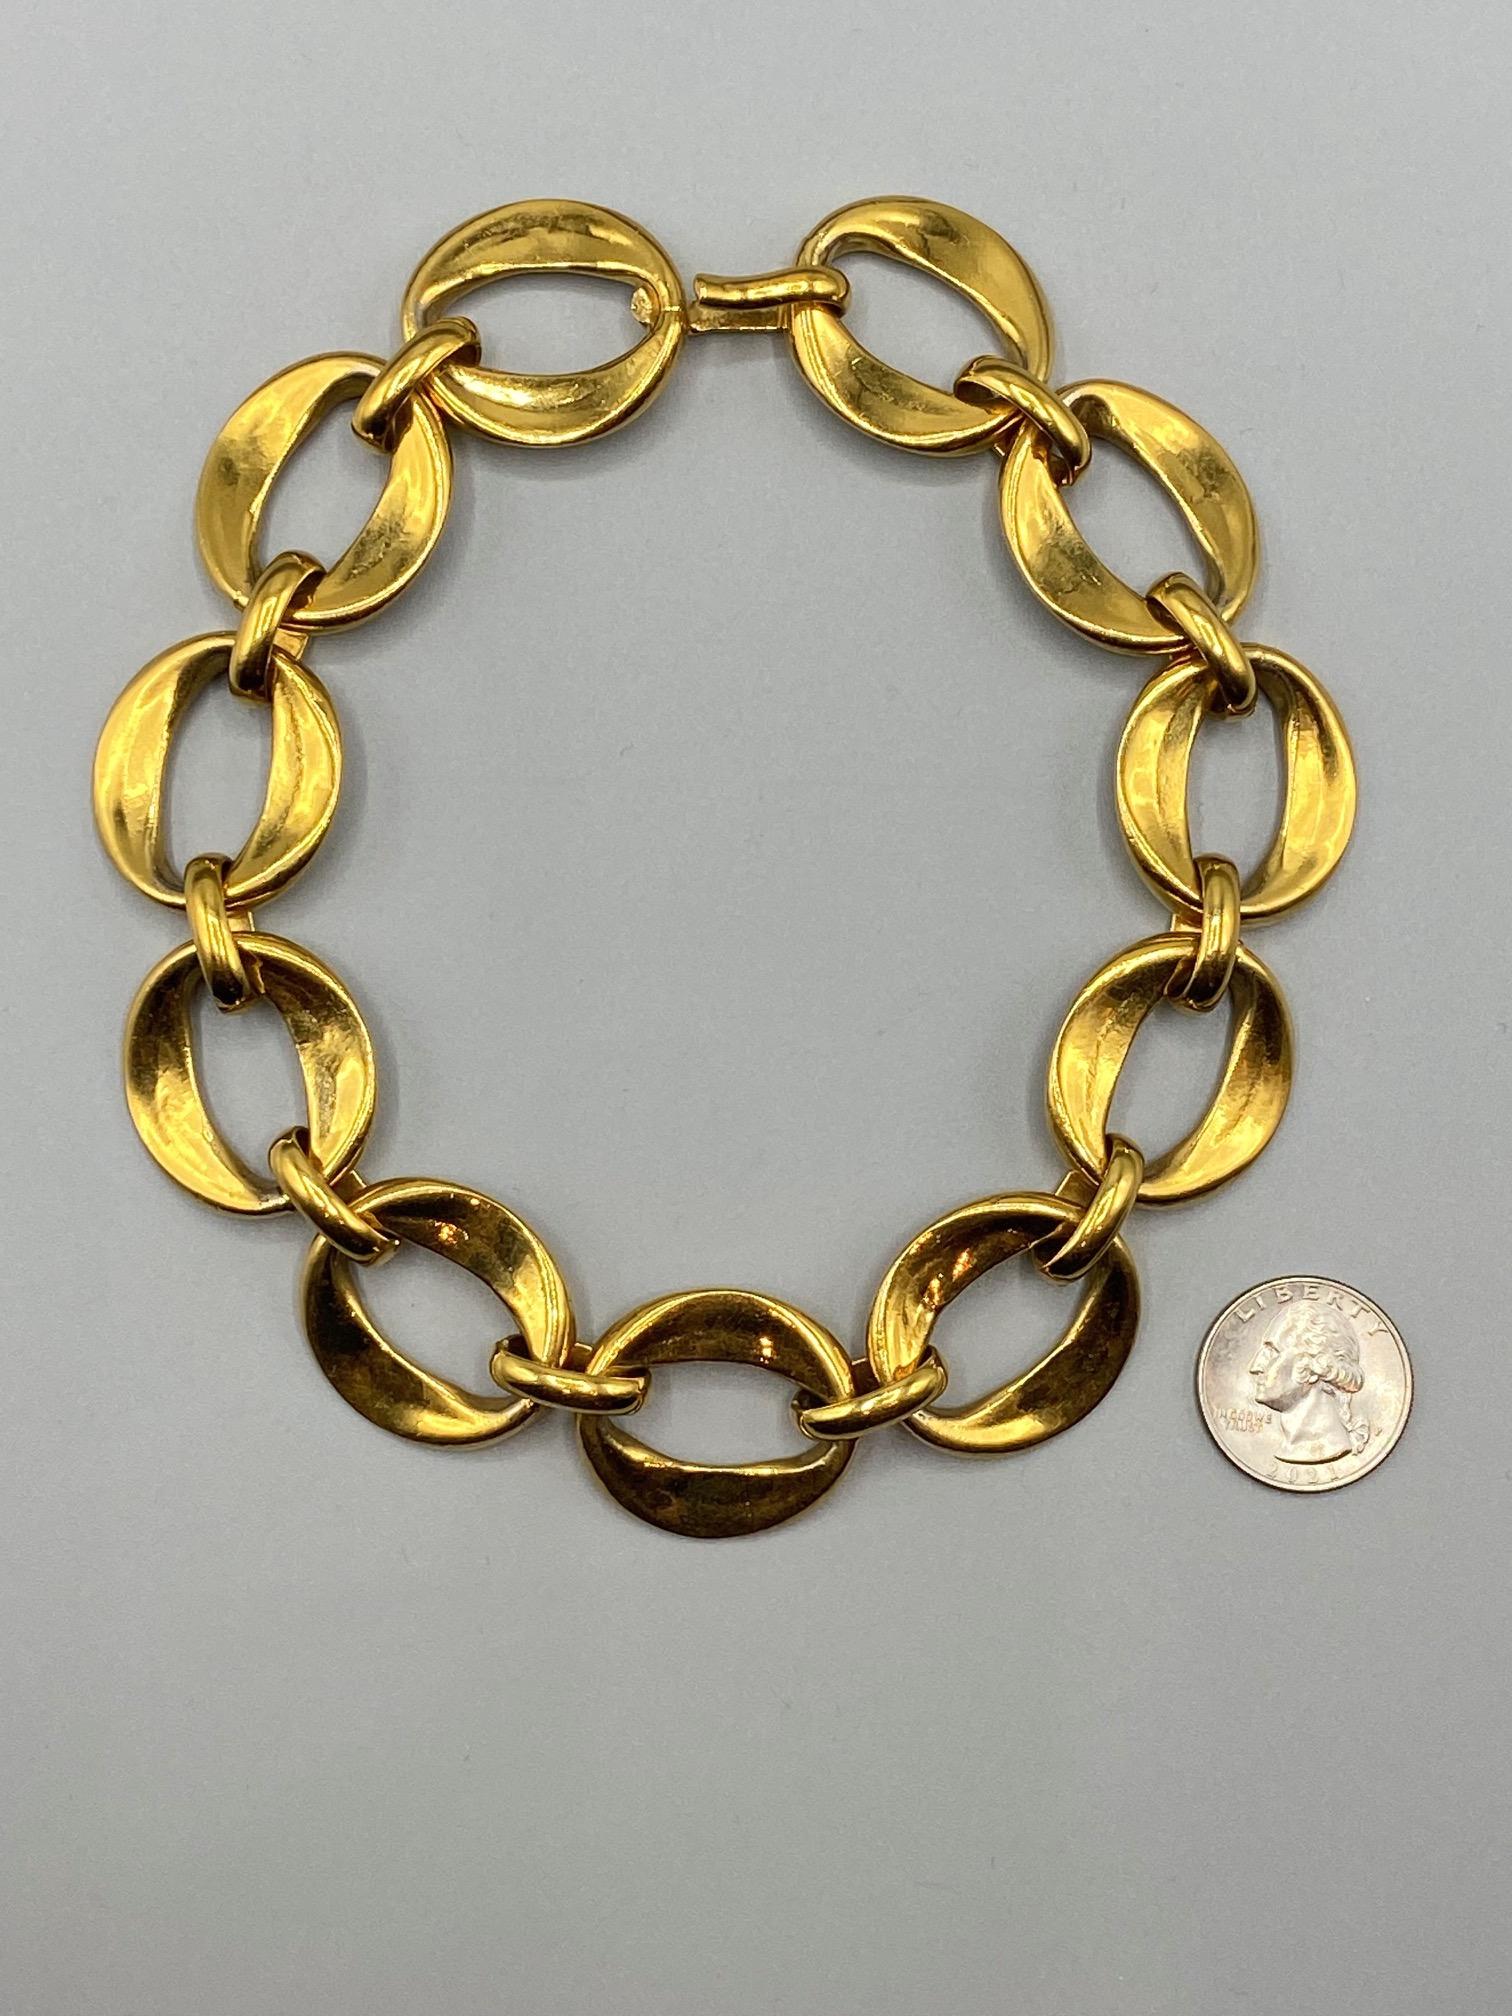 Chanel early 1980s large link 18K gold plate large link necklace. The larger oval links are cast wider, .25 of an inch, on the ends so the front and back have a concave design. The middle of the links are .13 of an inch thick. Each link is 1.13 inch